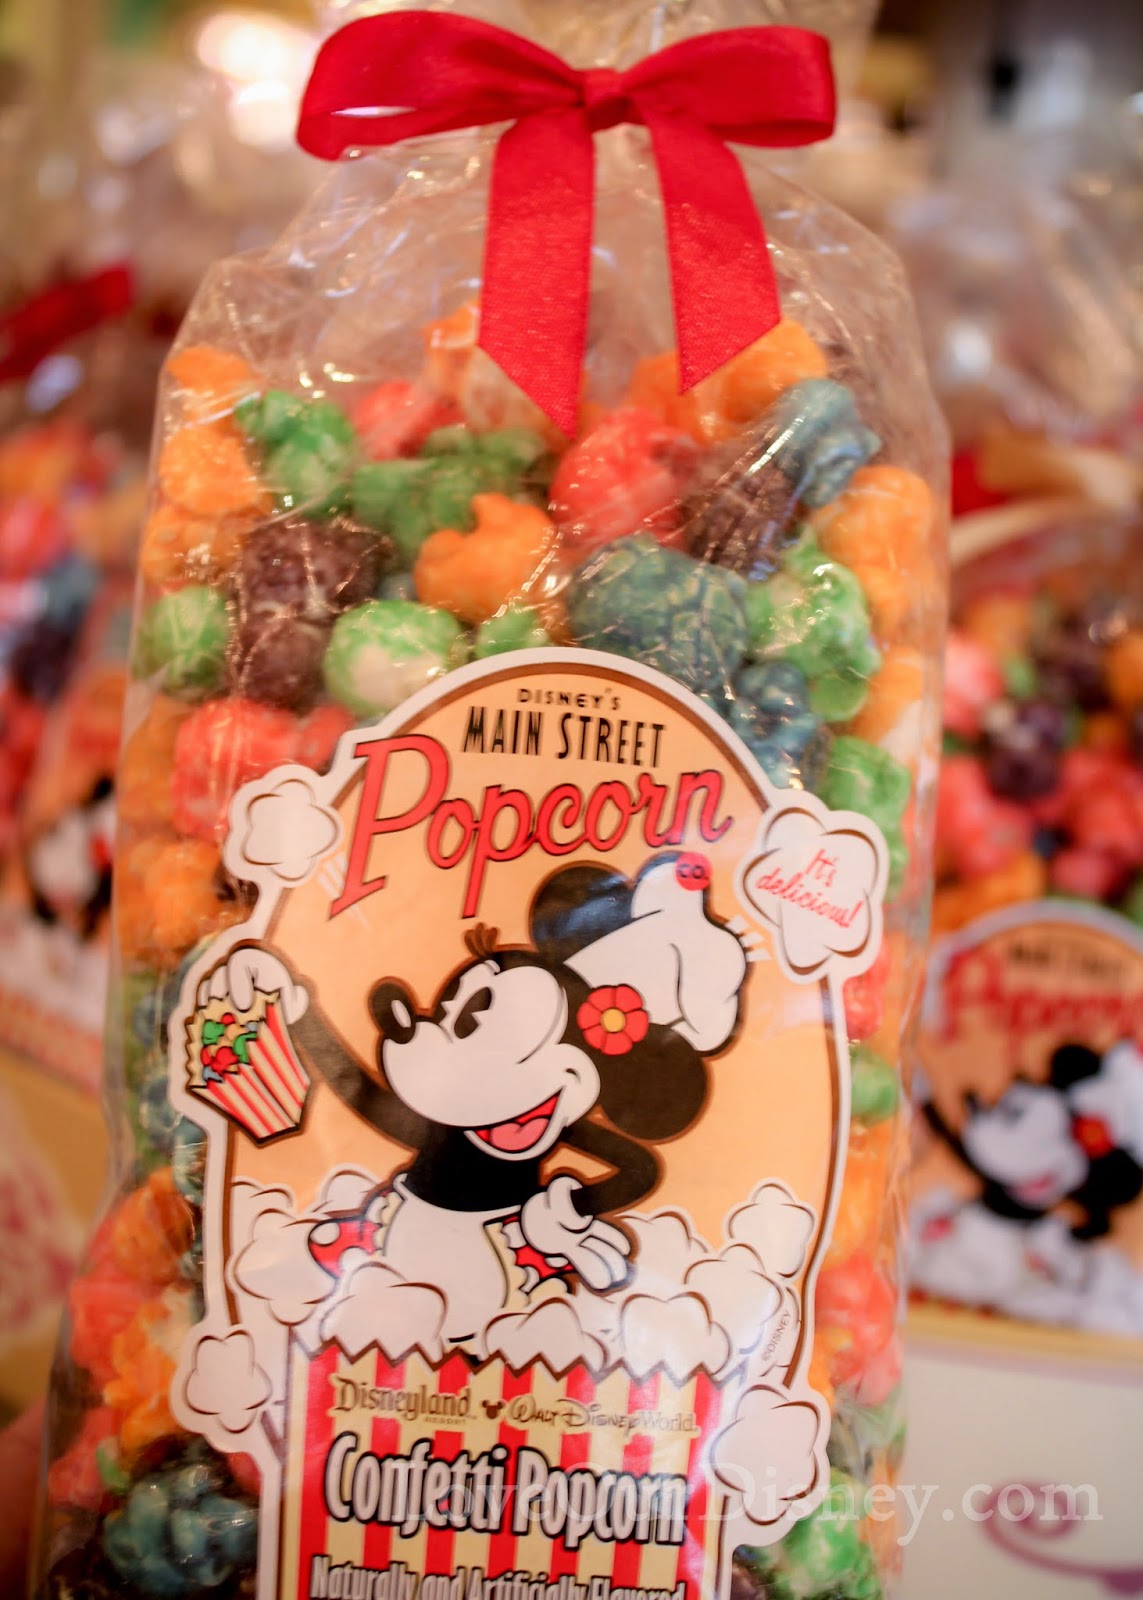 So many different types of popcorn at Disneyland's Candy Palace. LoveOurDisney.com